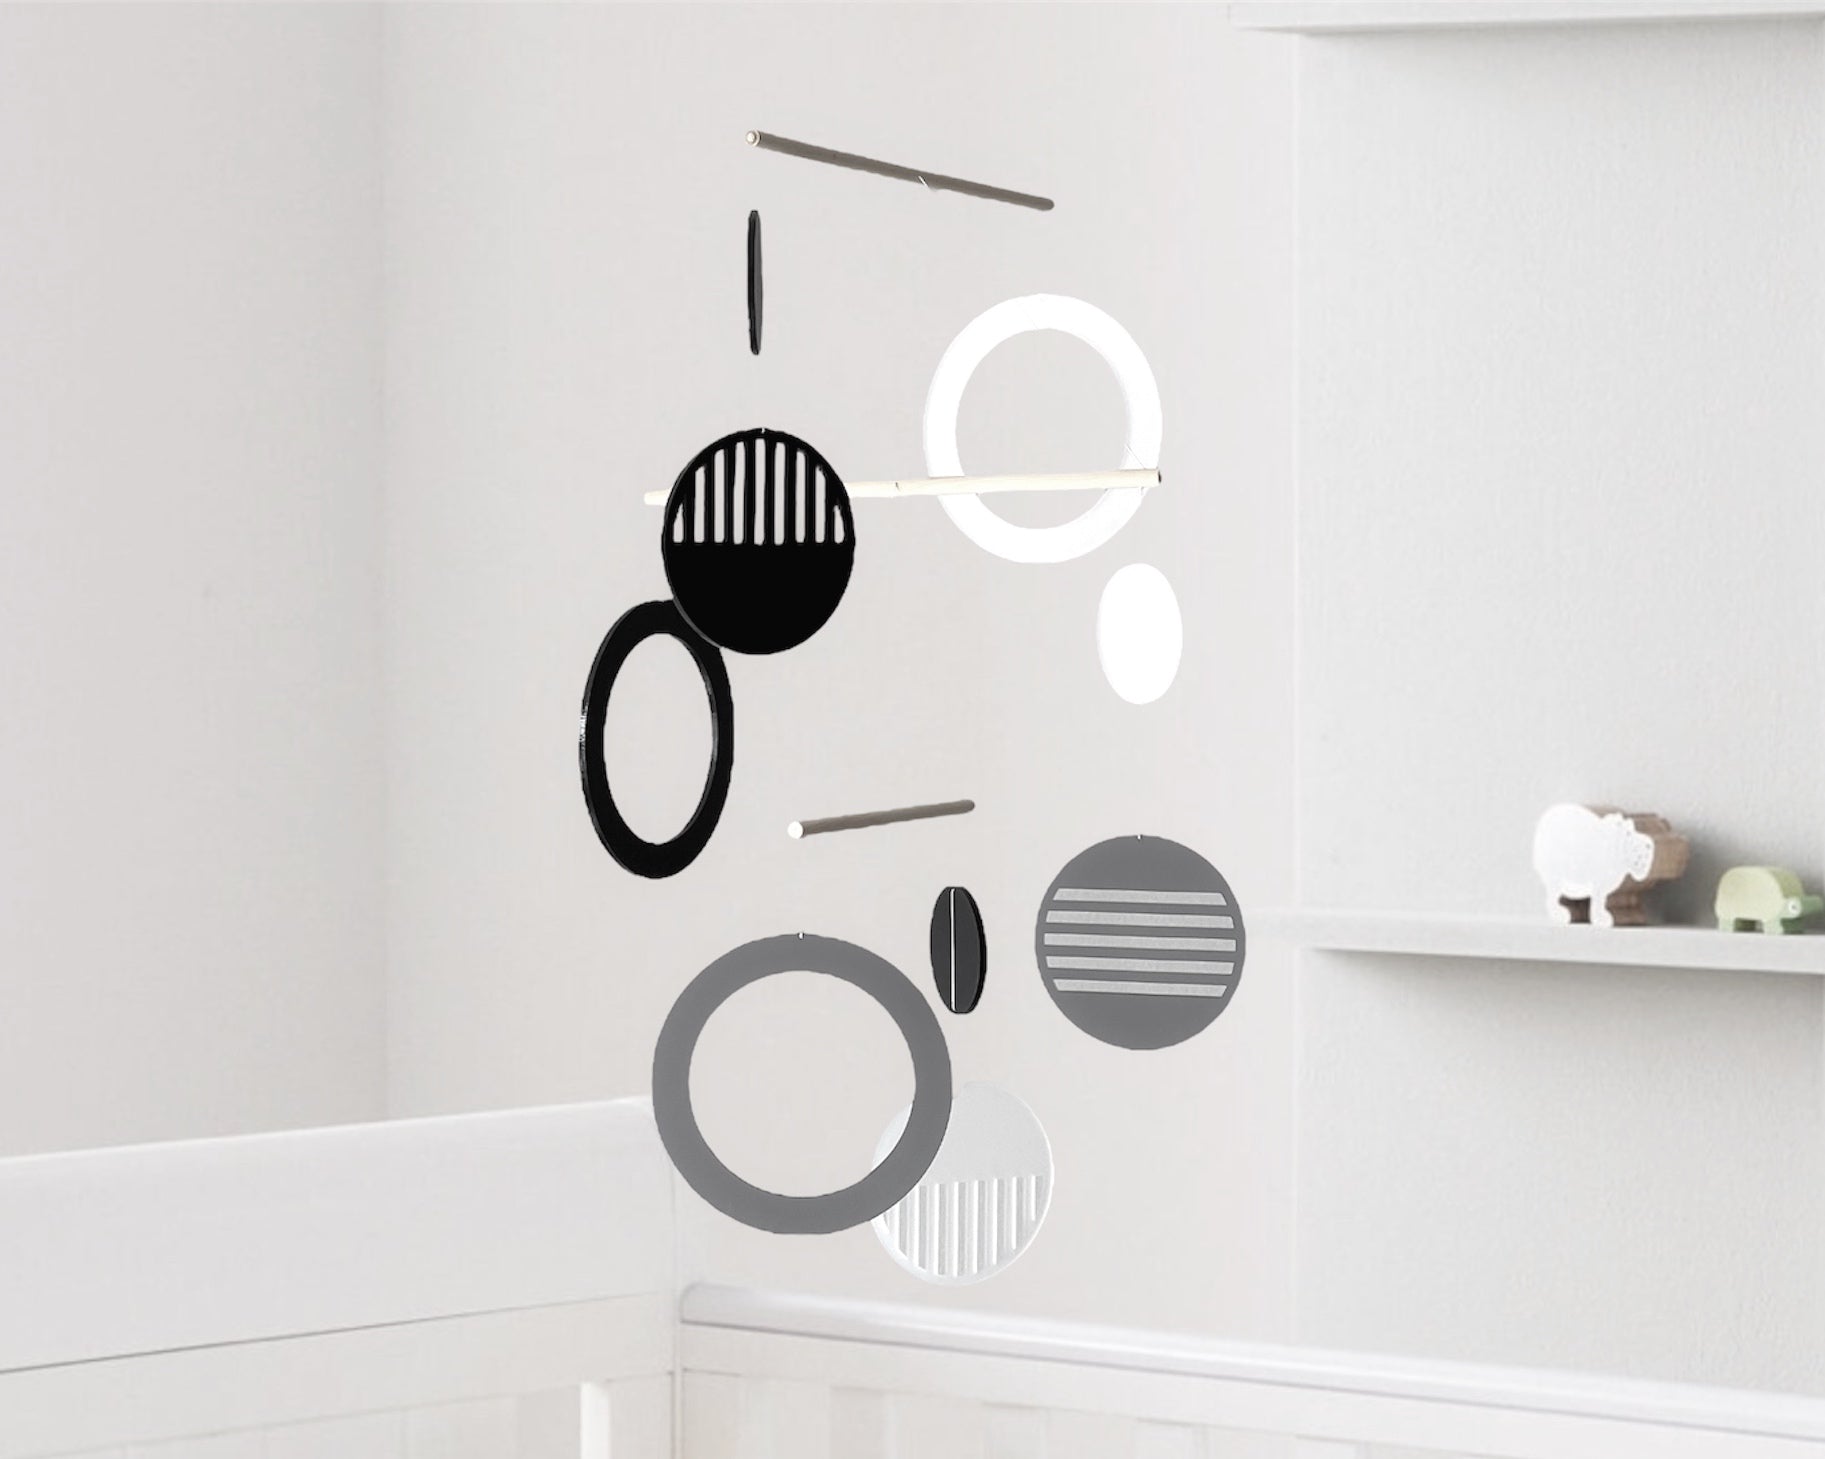 Monochrome baby mobile - Luna The Illuminist - sensory high contrast black  white  - Kinetic Mobile Kinetic Art Sculpture Crib Mobile nursery Mobile Nursery Mobile Art Mid Century Art  Mid Century modern mobiles for adults furniture and decor Hanging